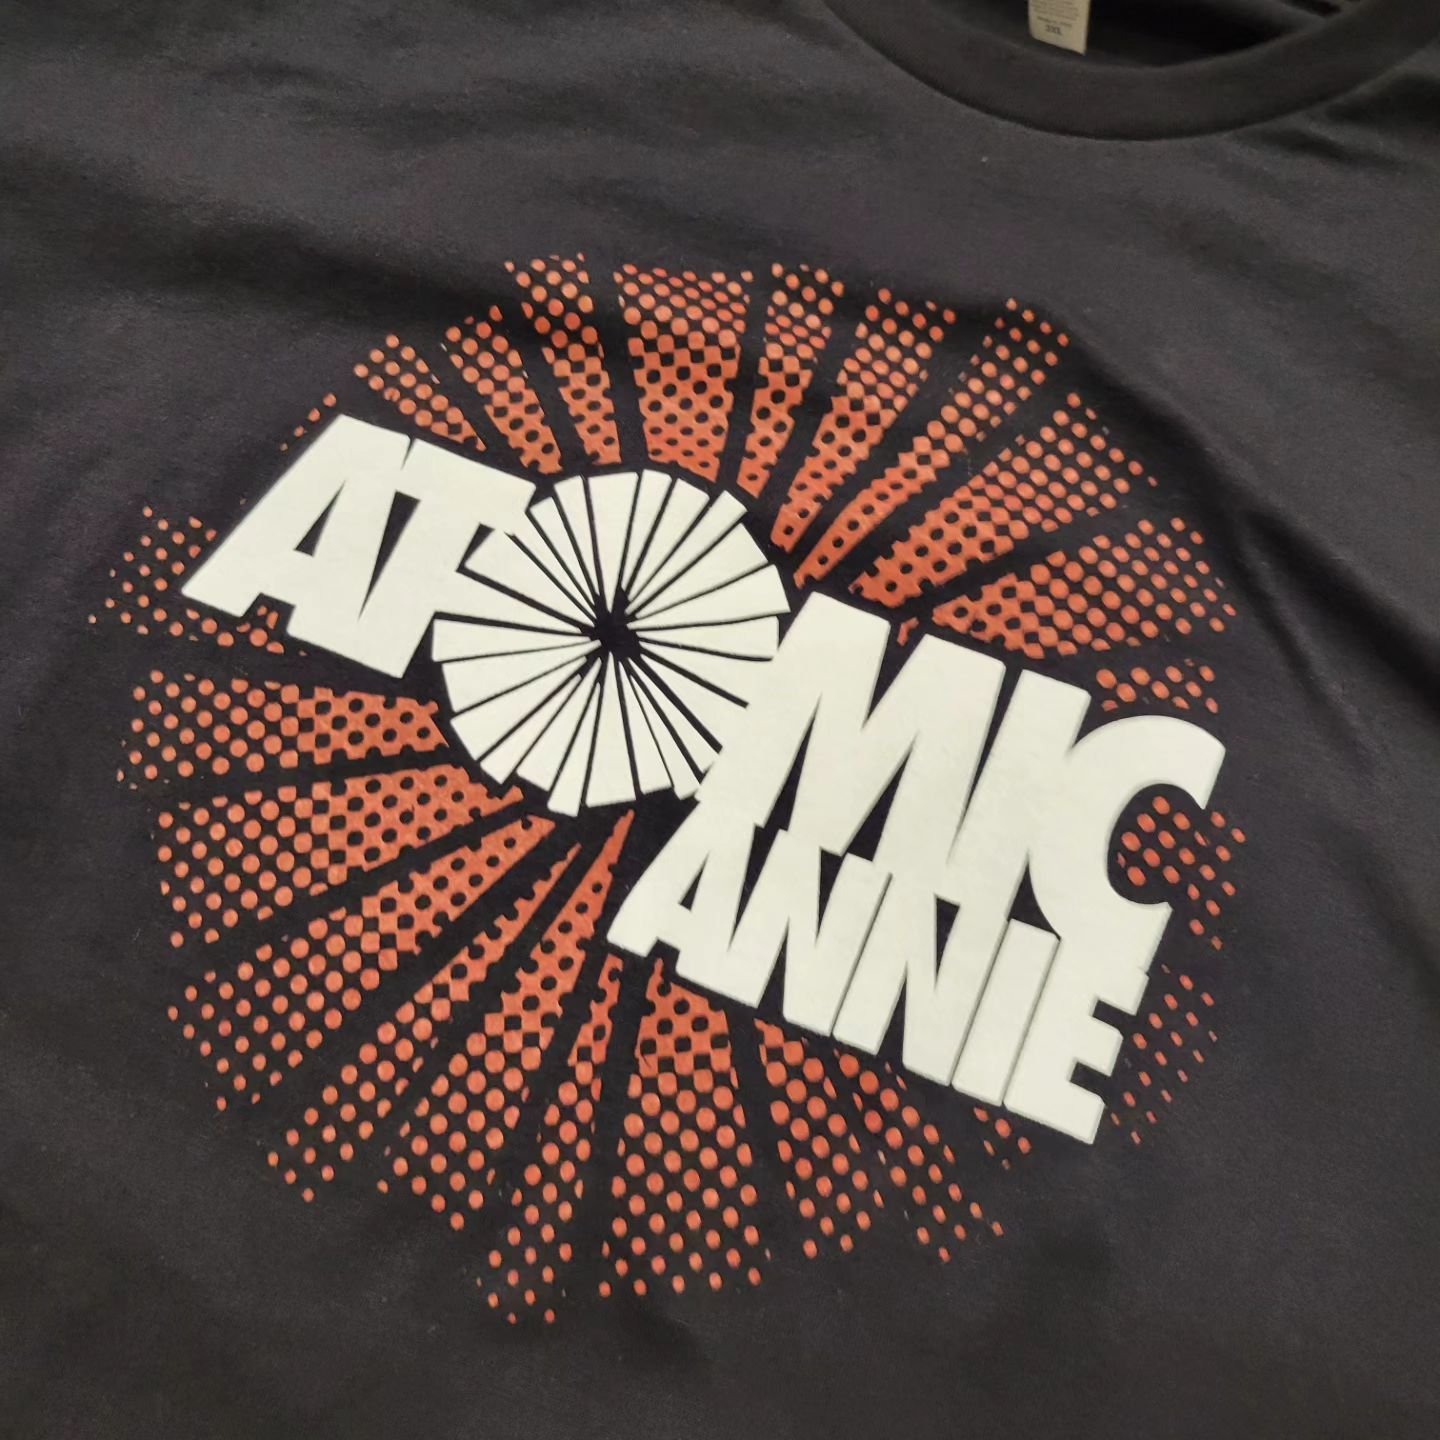 Shirts and tank tops for Atomic Annie. Make sure you catch them this weekend at @horrocksfarmmarket on Saturday!